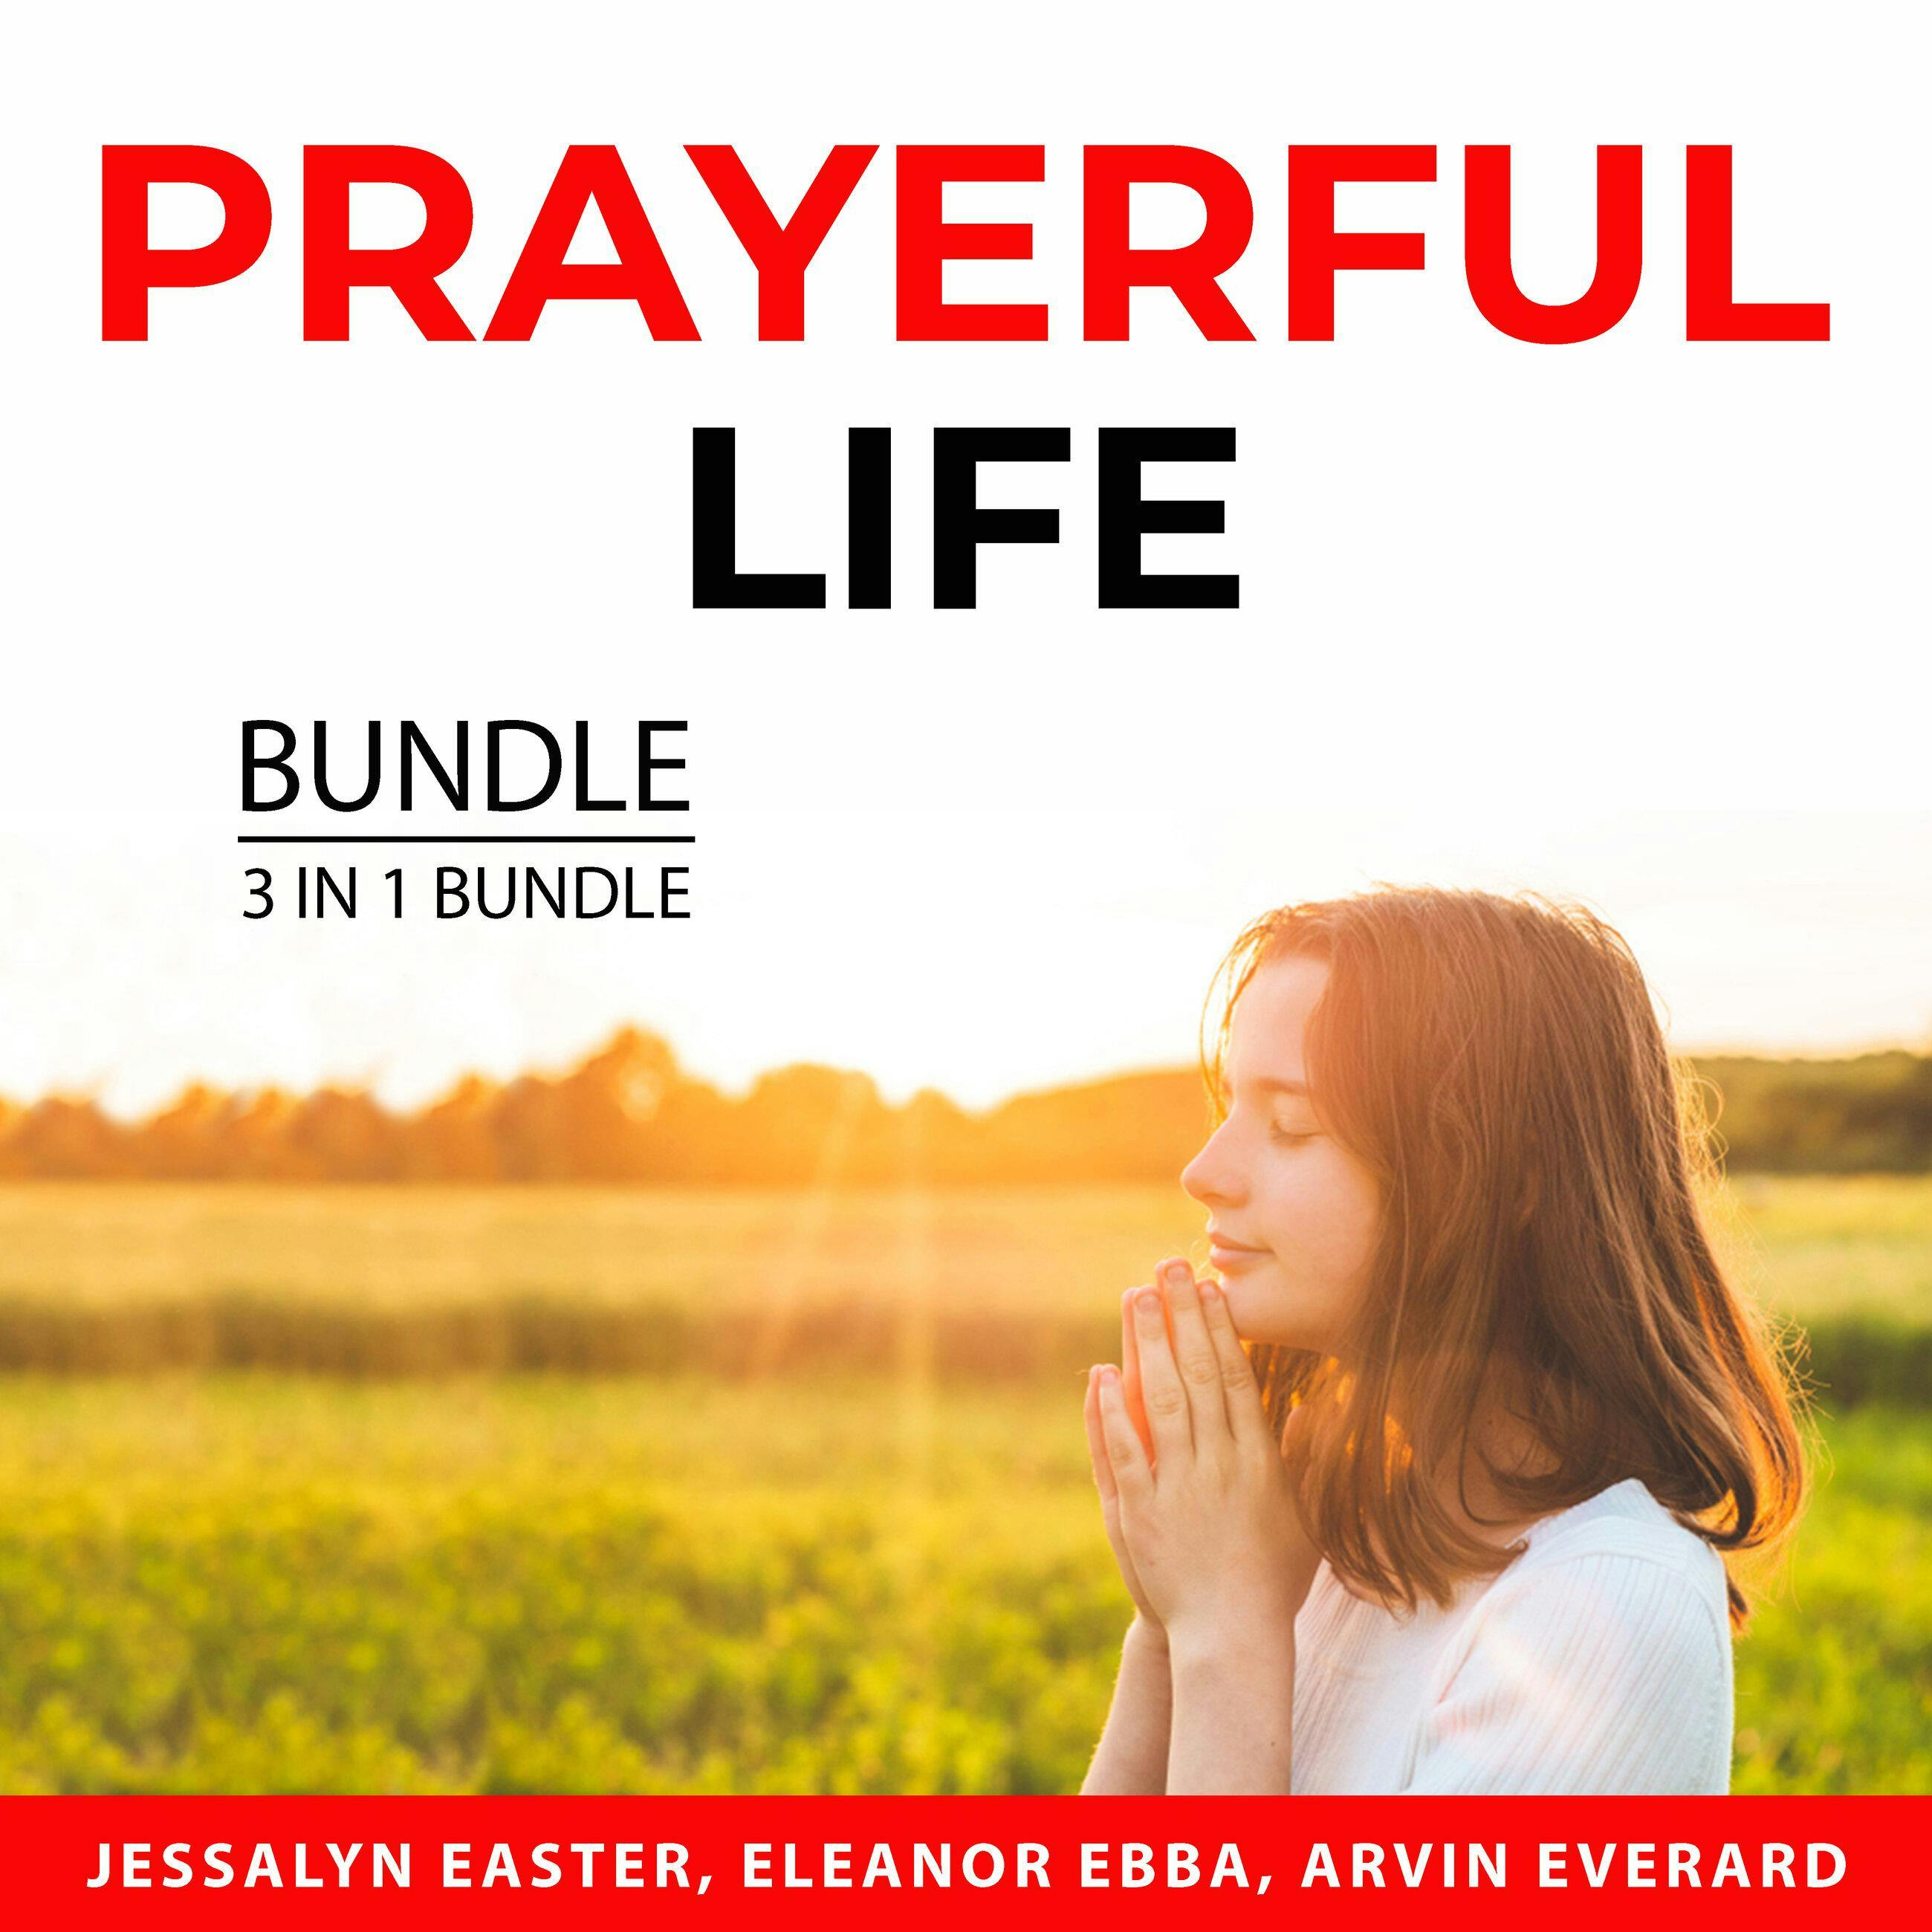 Prayerful Life Bundle, 3 in 1 Bundle: Affirmative Prayers Book, Living by Faith and The Power of Affirmative Prayers - Jessalyn Easter, Arvin Everard, Eleanor Ebba